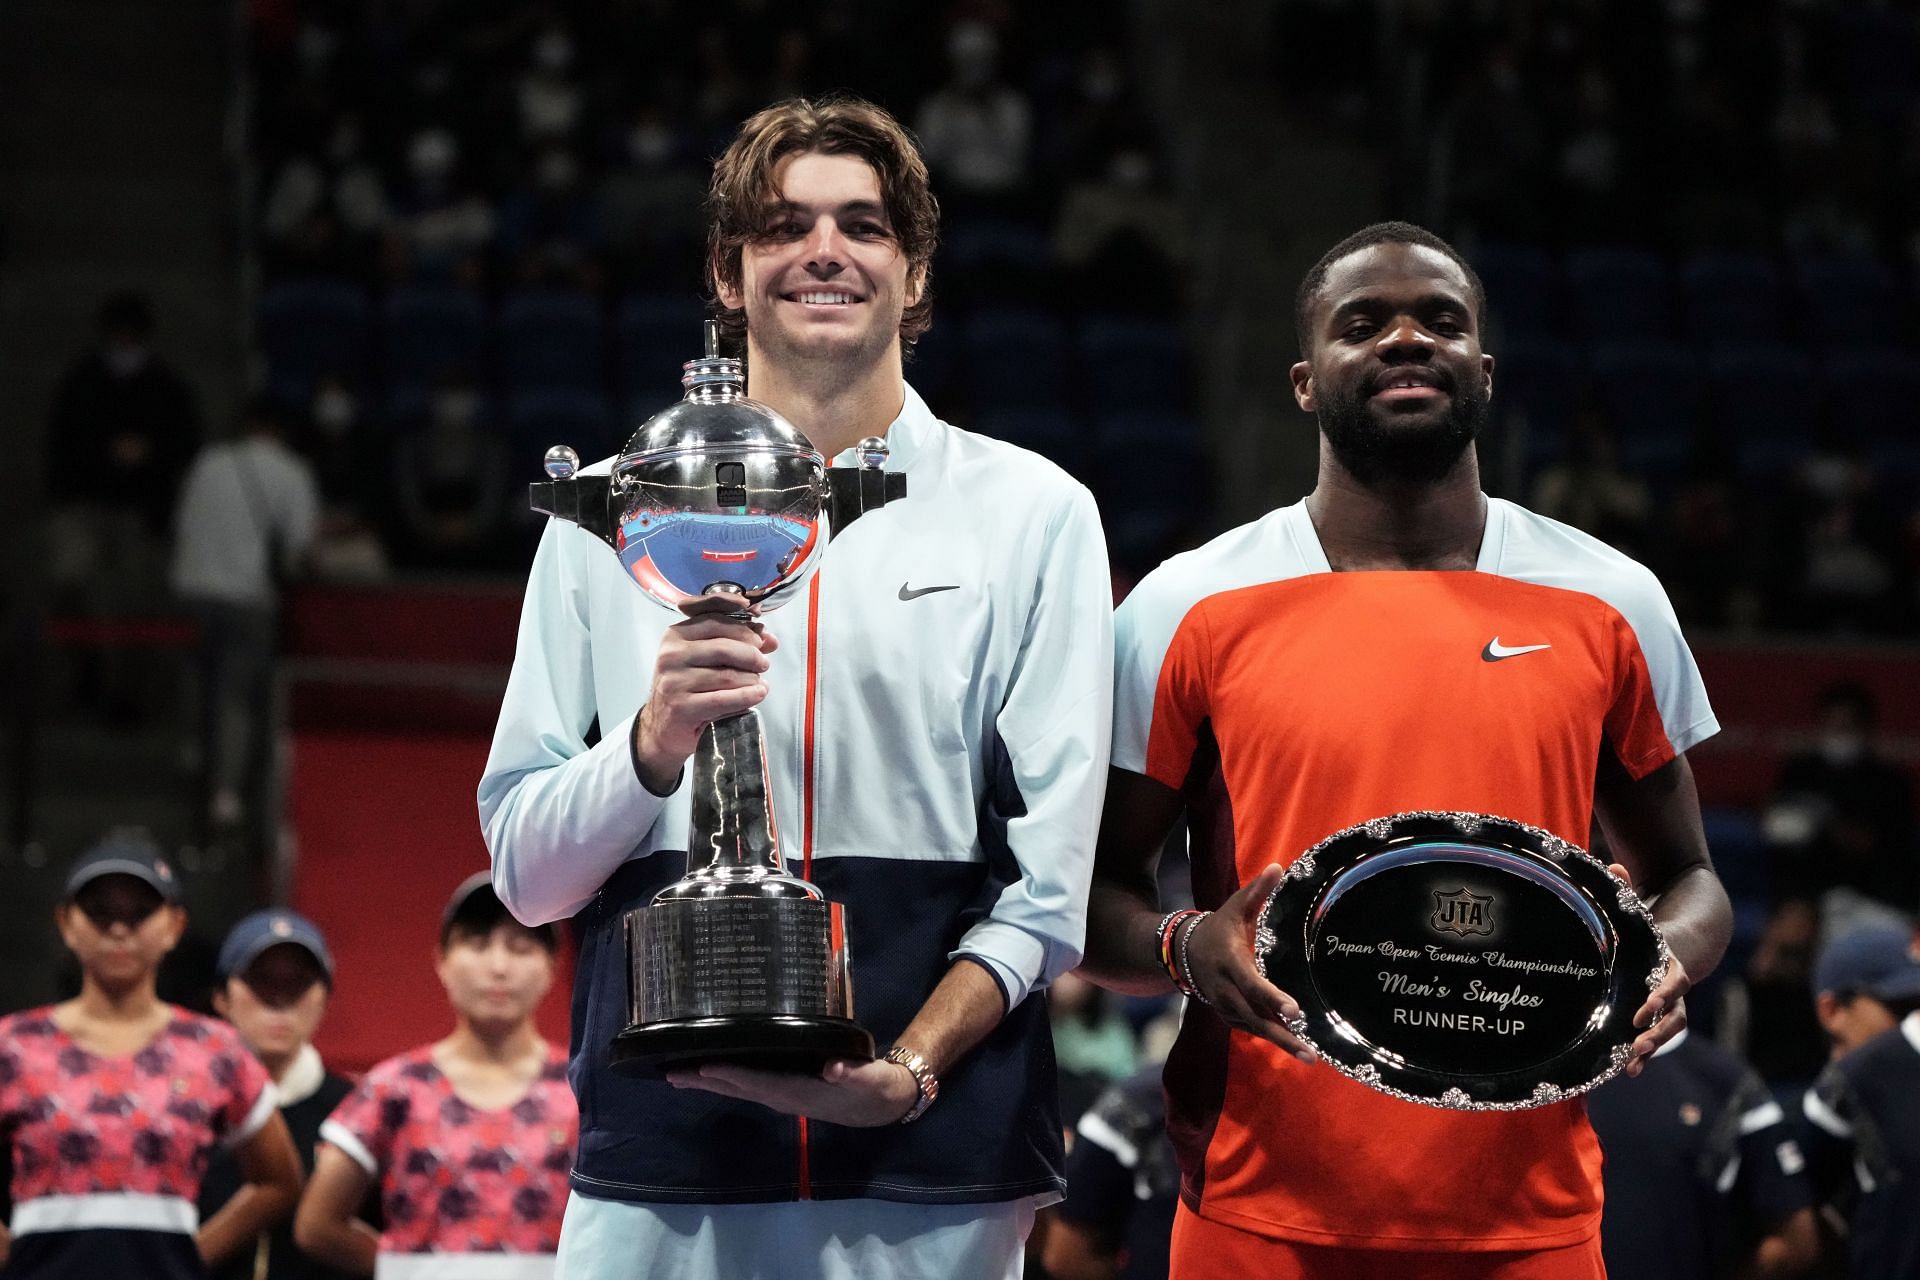 Compatriots Taylor Fritz and Frances Tiafoe played the finals in Tokyo